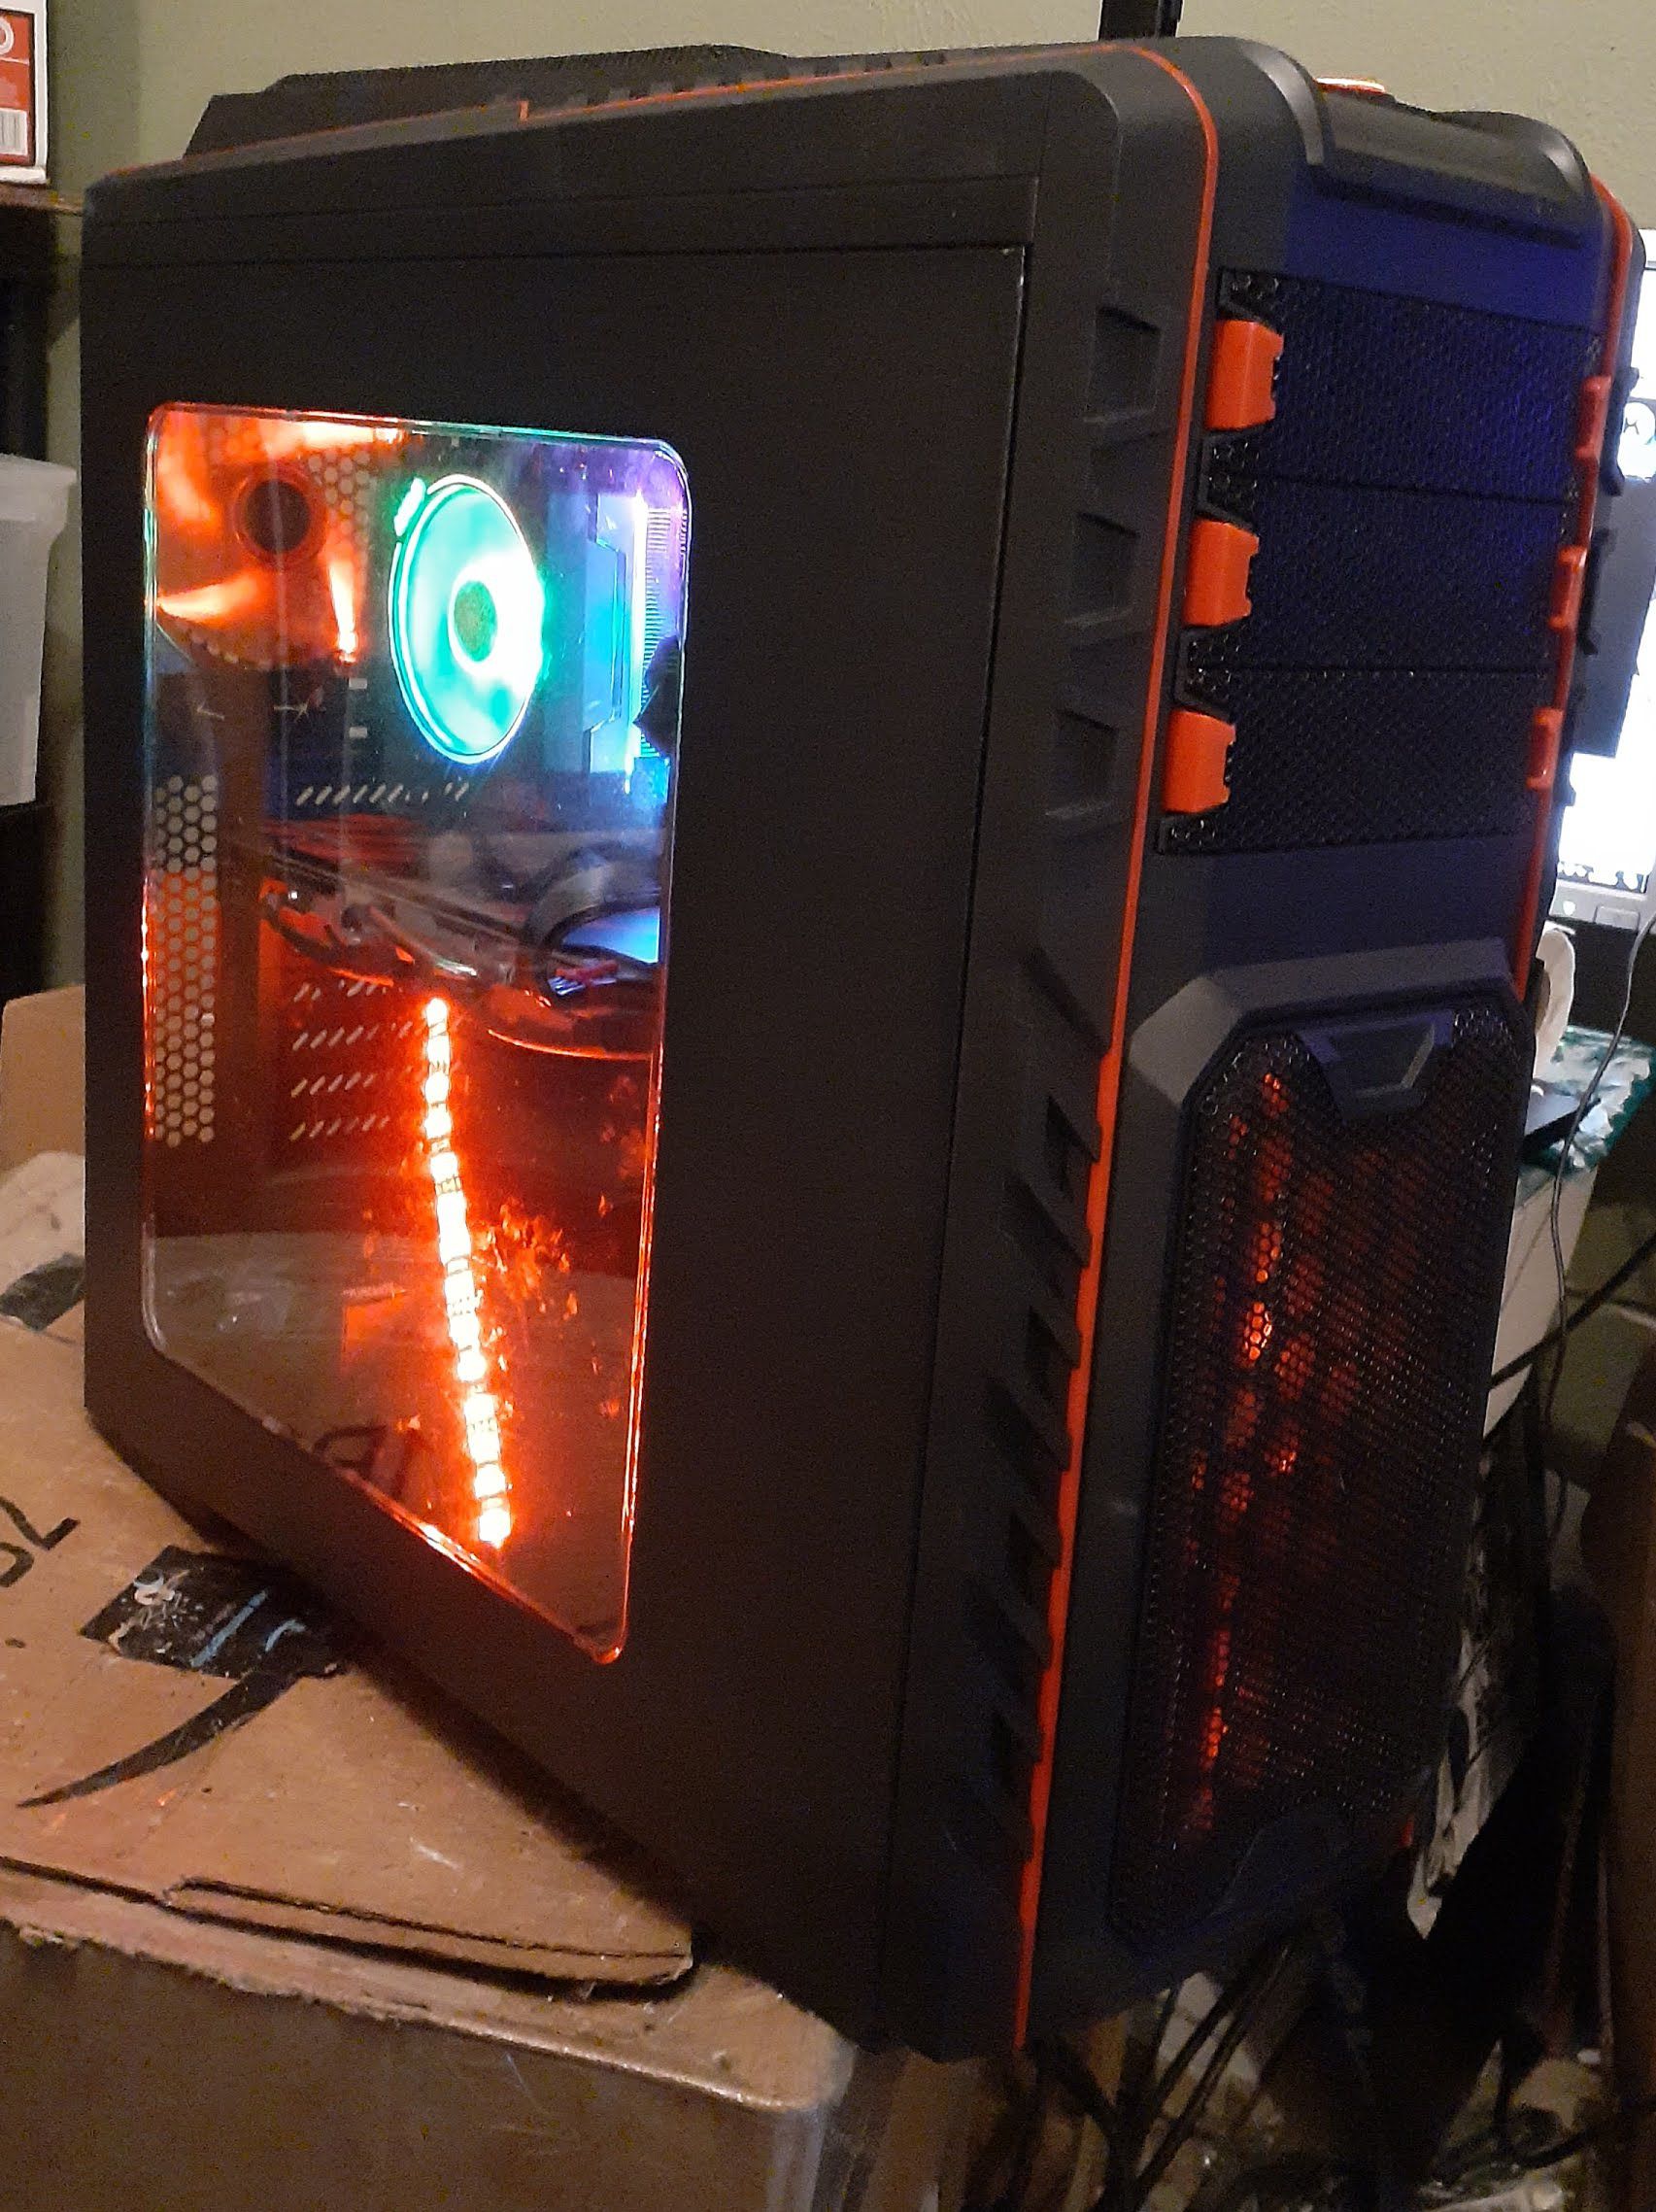 Ryzen 2700x Custom Built Gaming PC with RX 570 8 gig Video Card. 6 months old, lightly used.